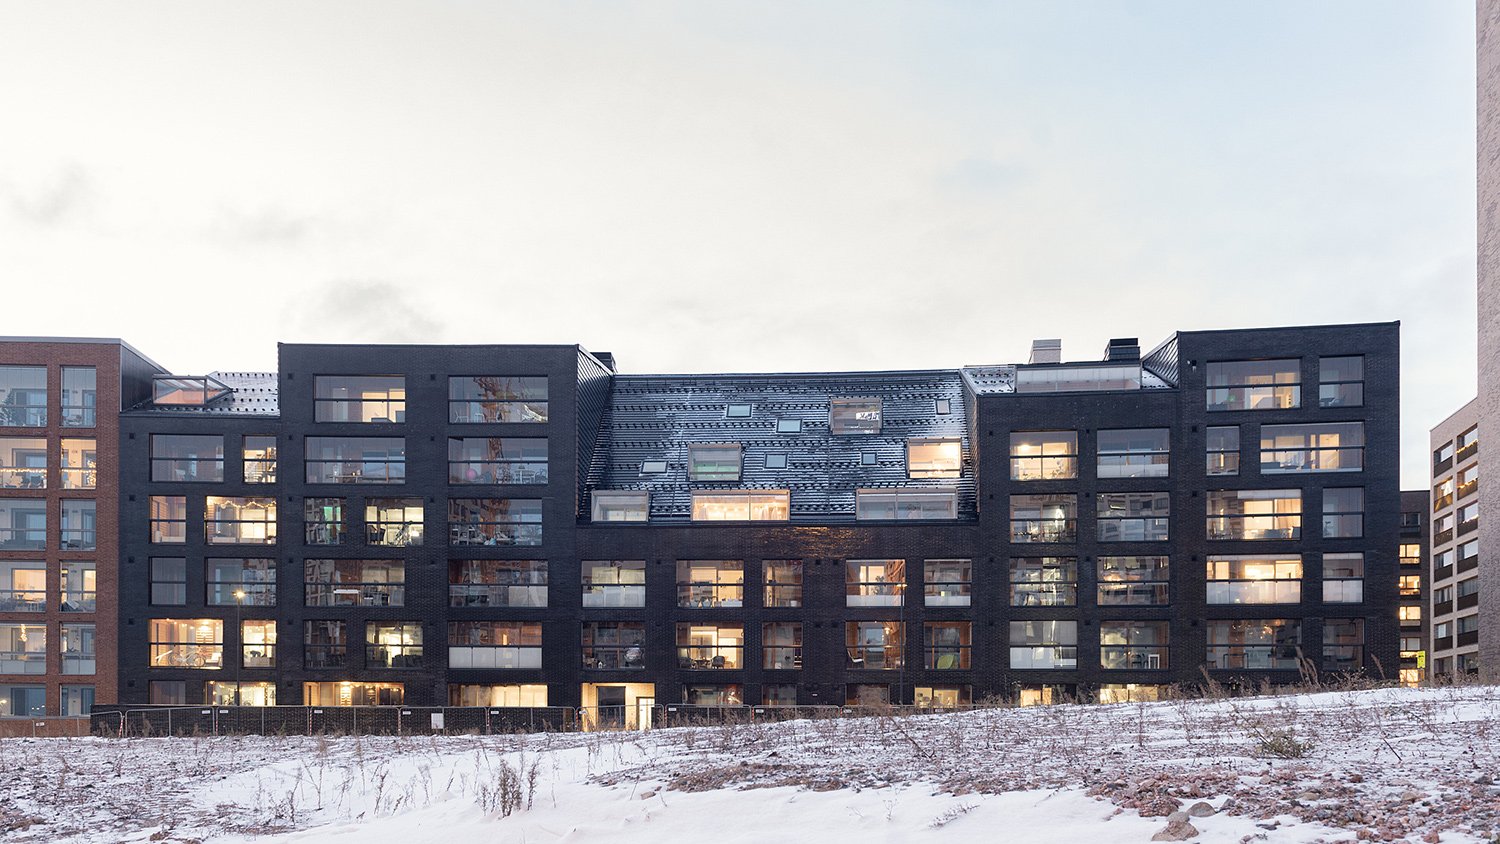 There are duplex apartments on the upper floors. | Hannu Rytky